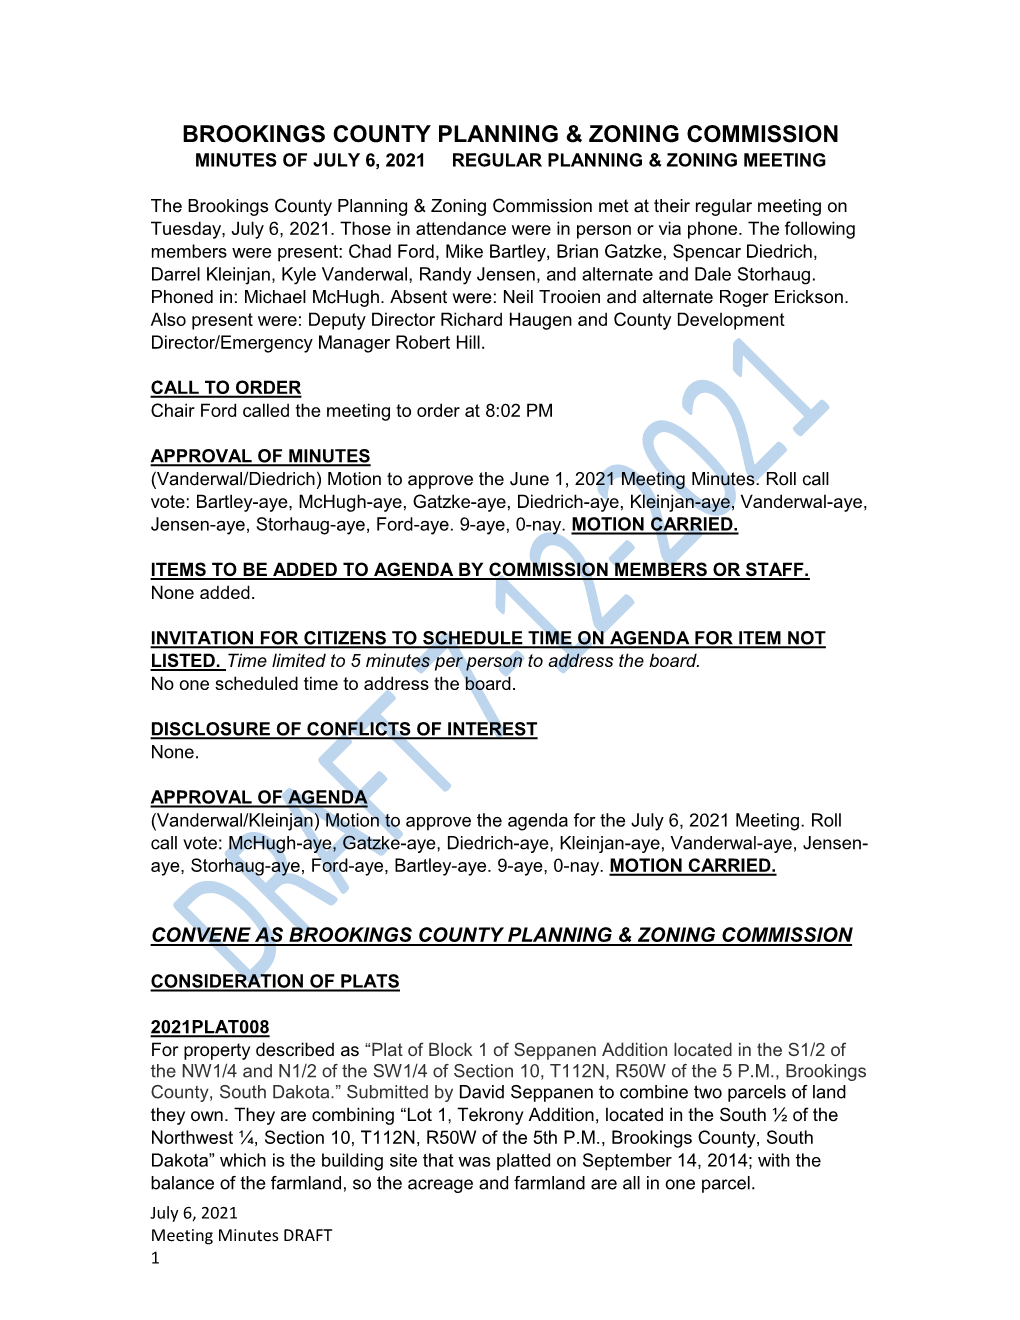 Brookings County Planning & Zoning Commission